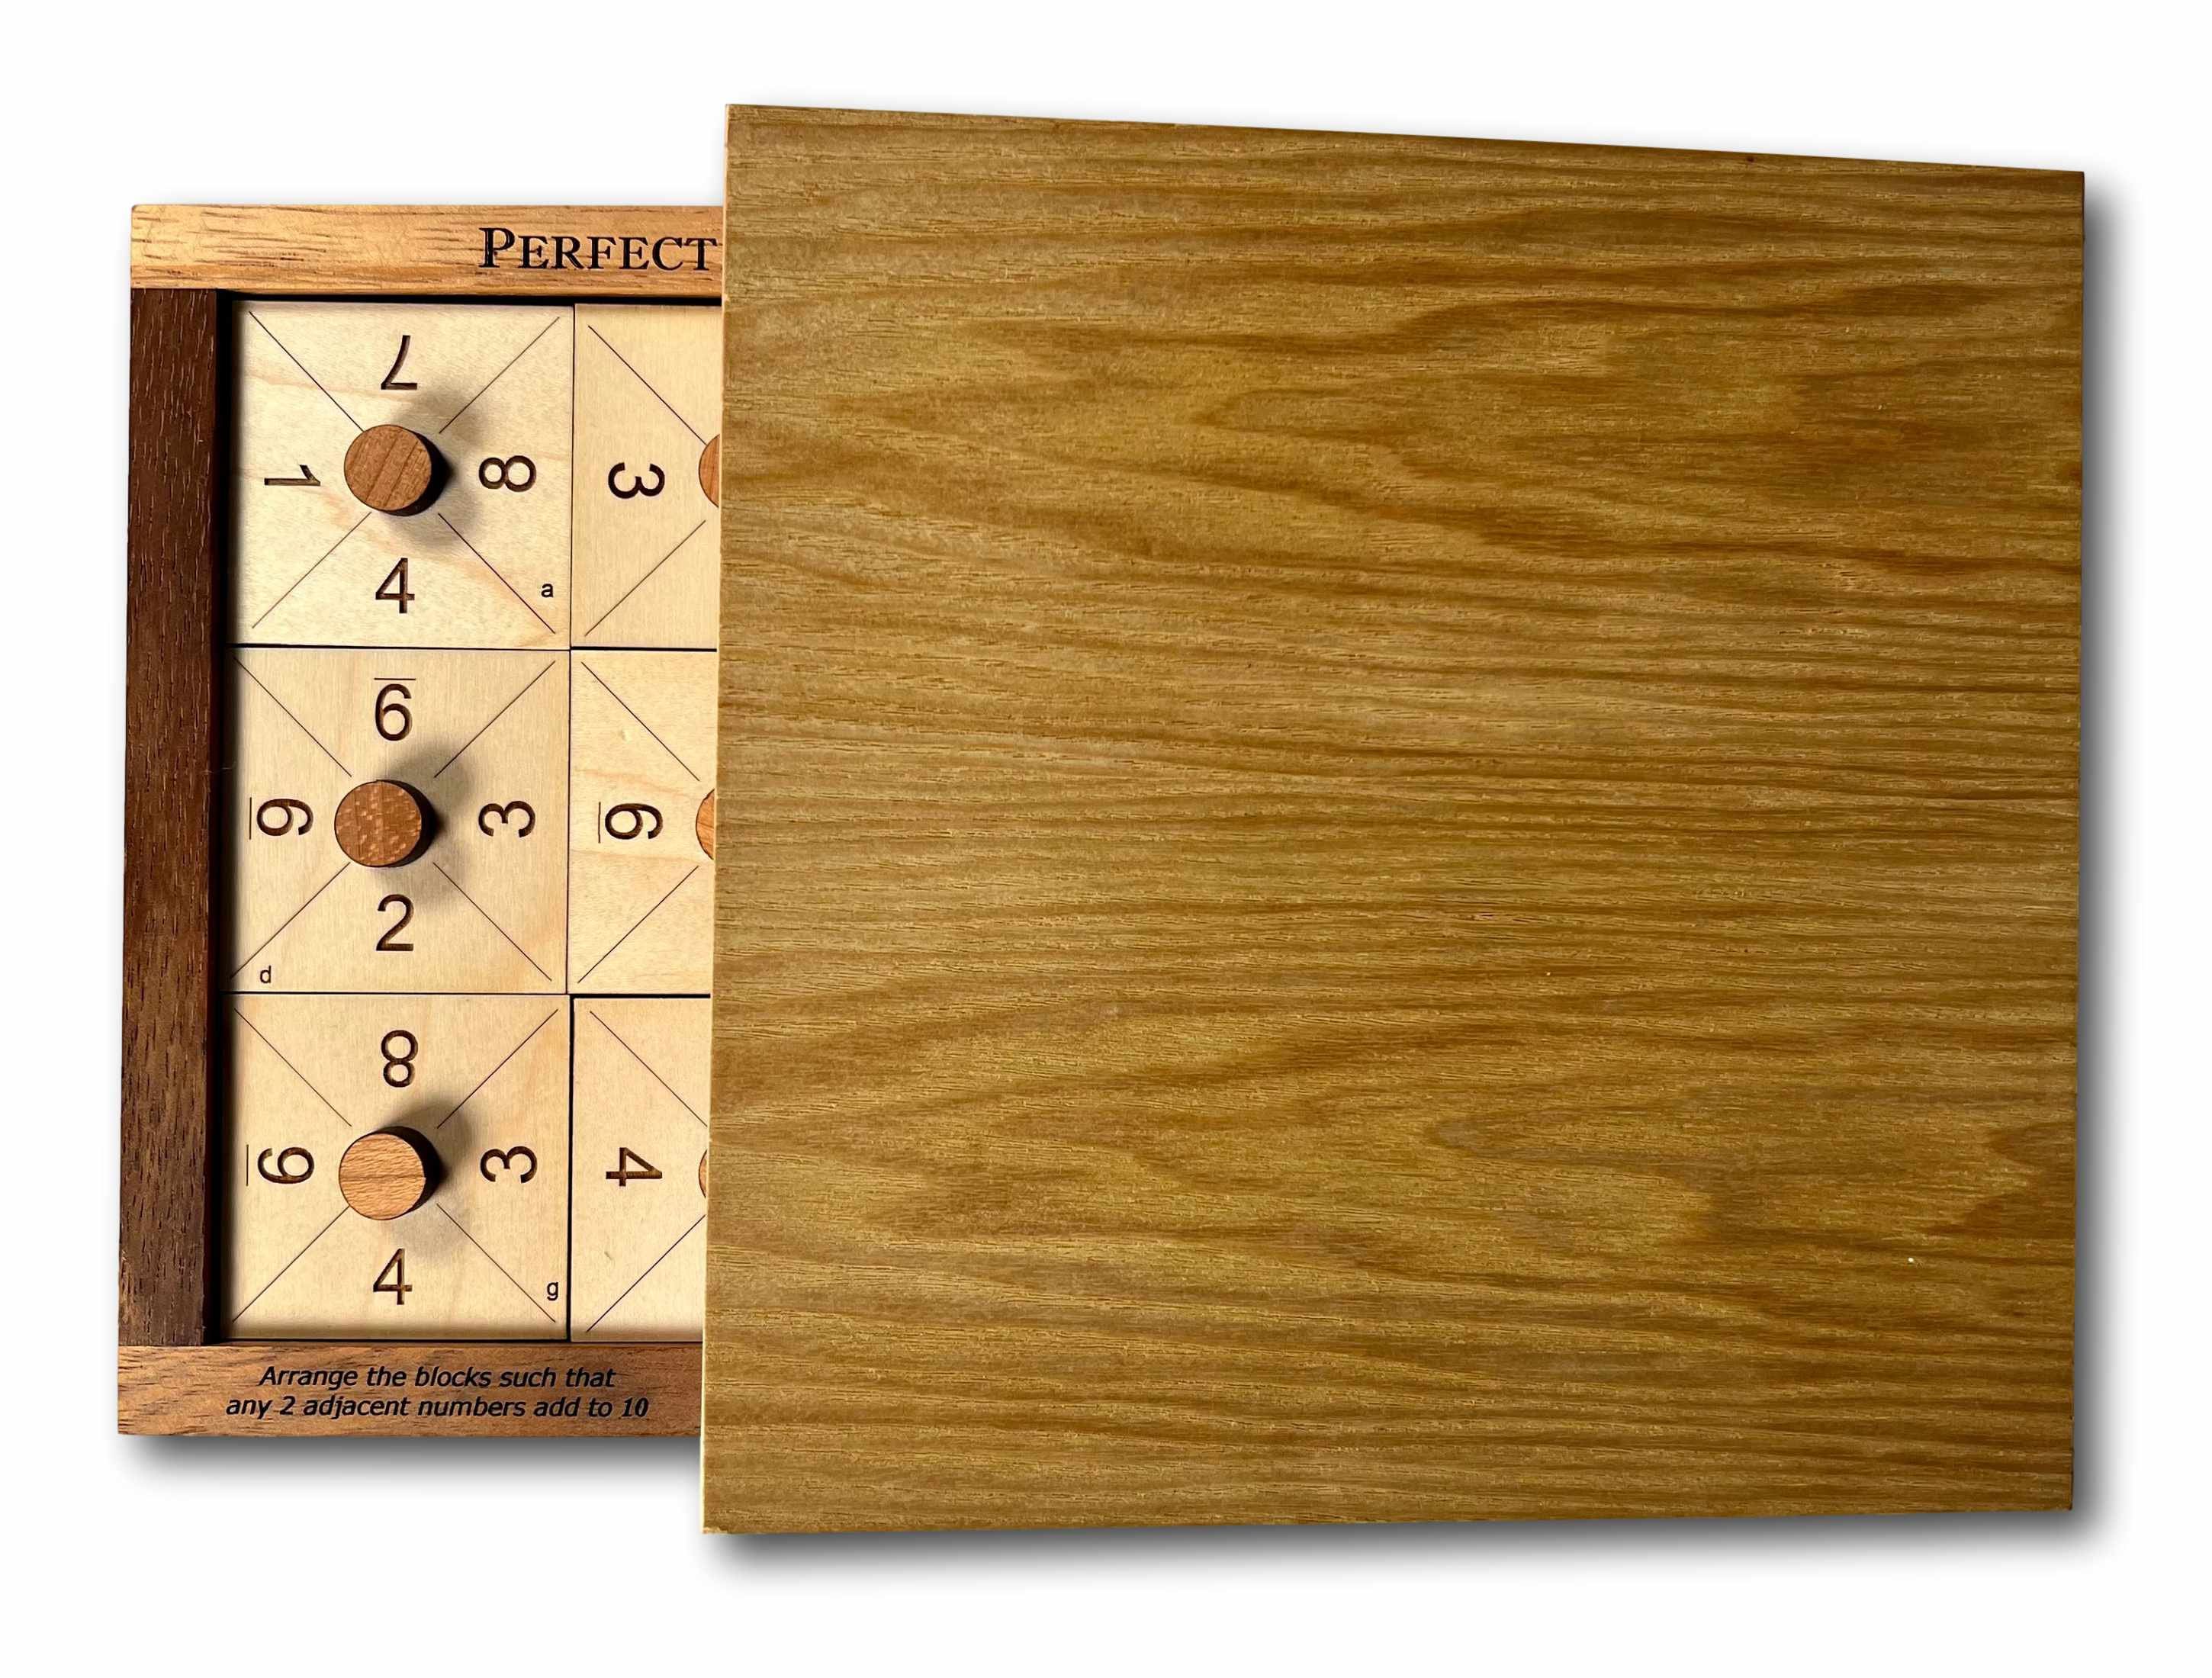 Perfect 10 Wood Brain Teaser Puzzle Get All Adjacent Numbers to Add to 10 -   Israel